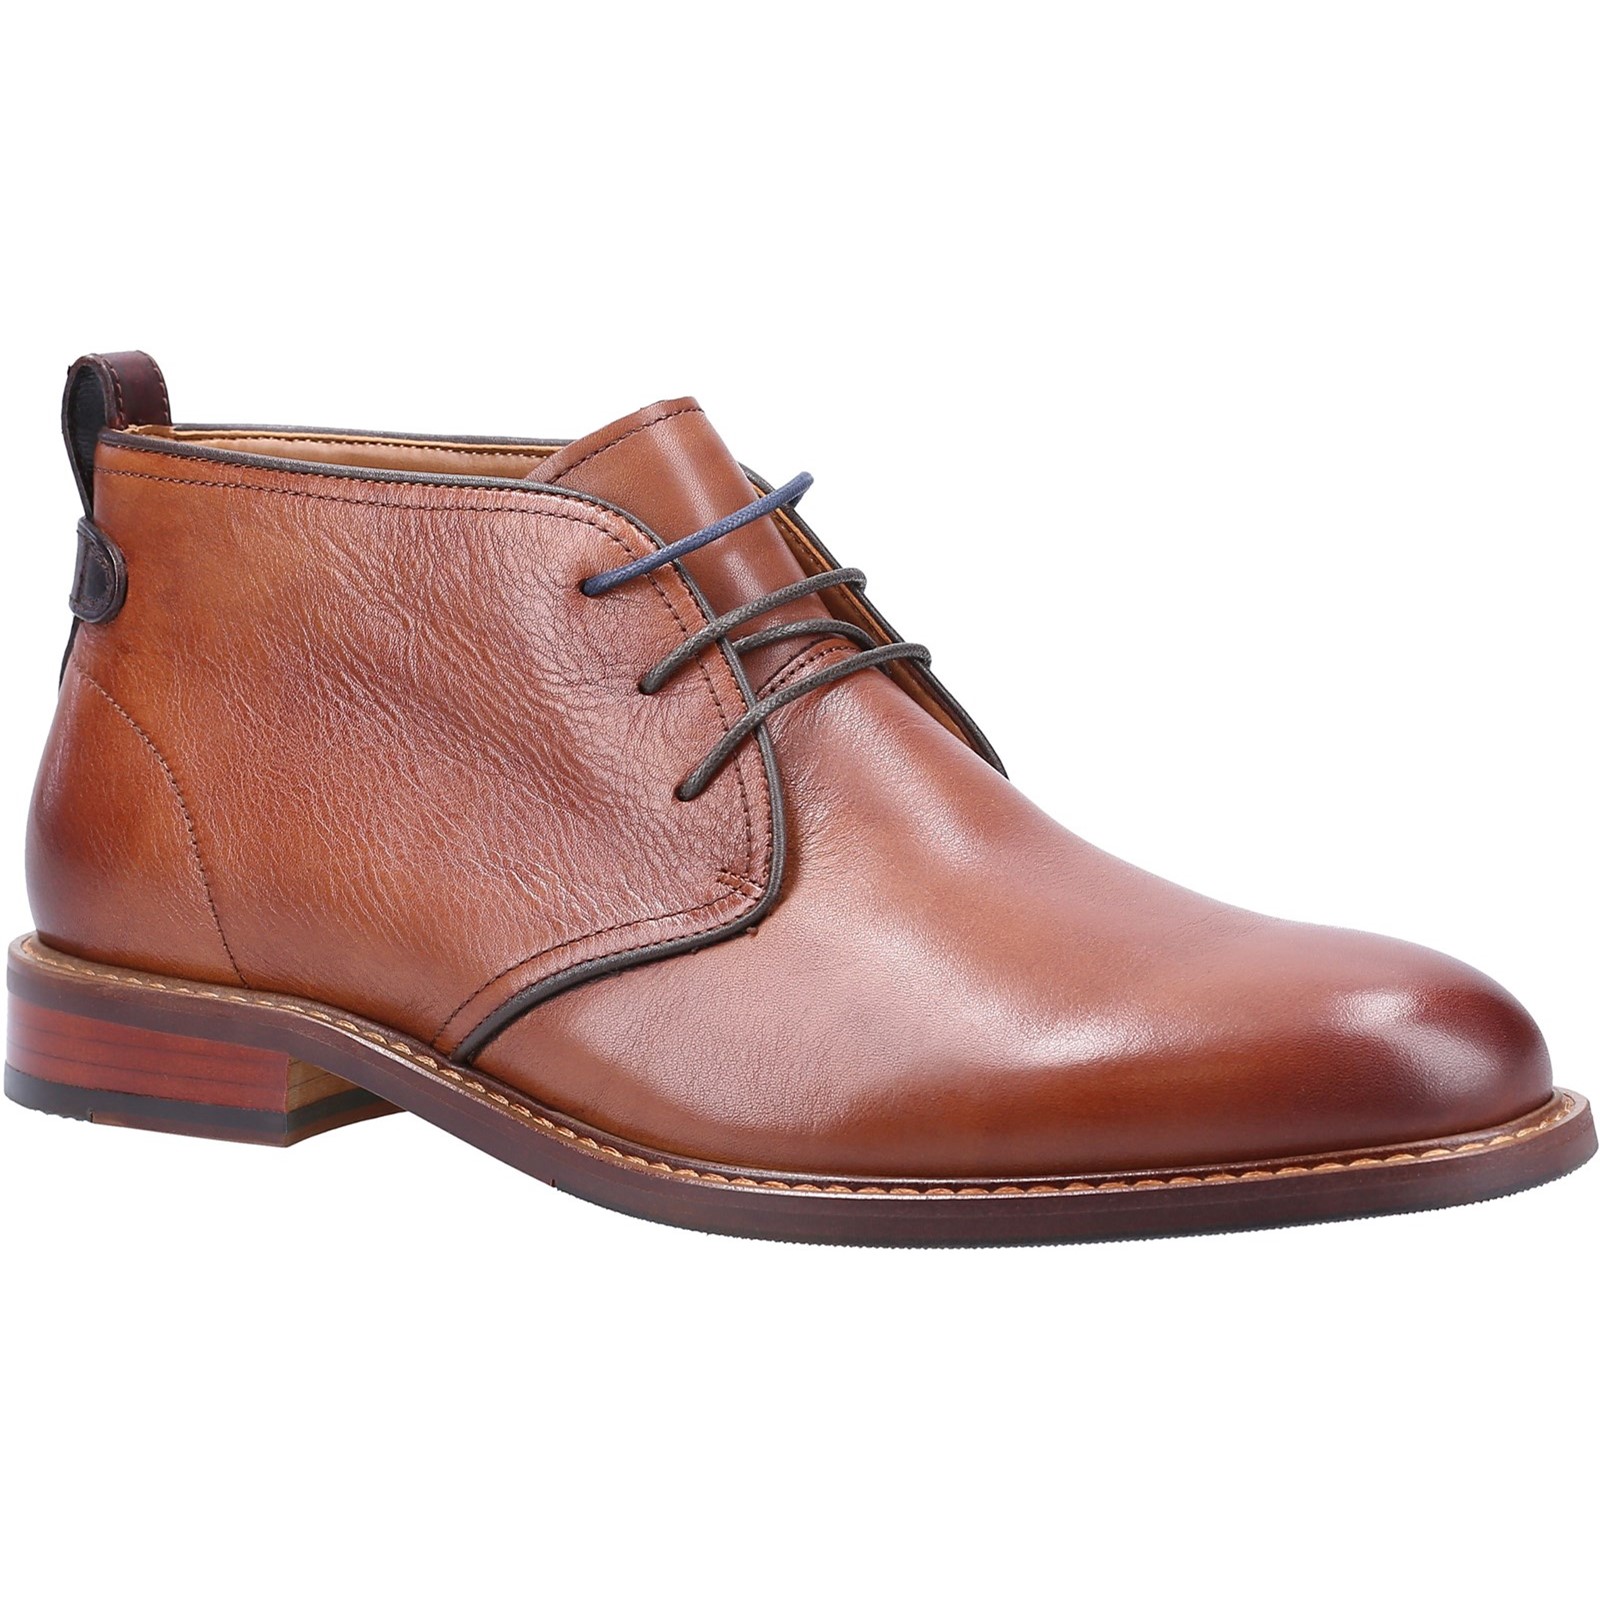 Marching Lace Up Chukka Boots